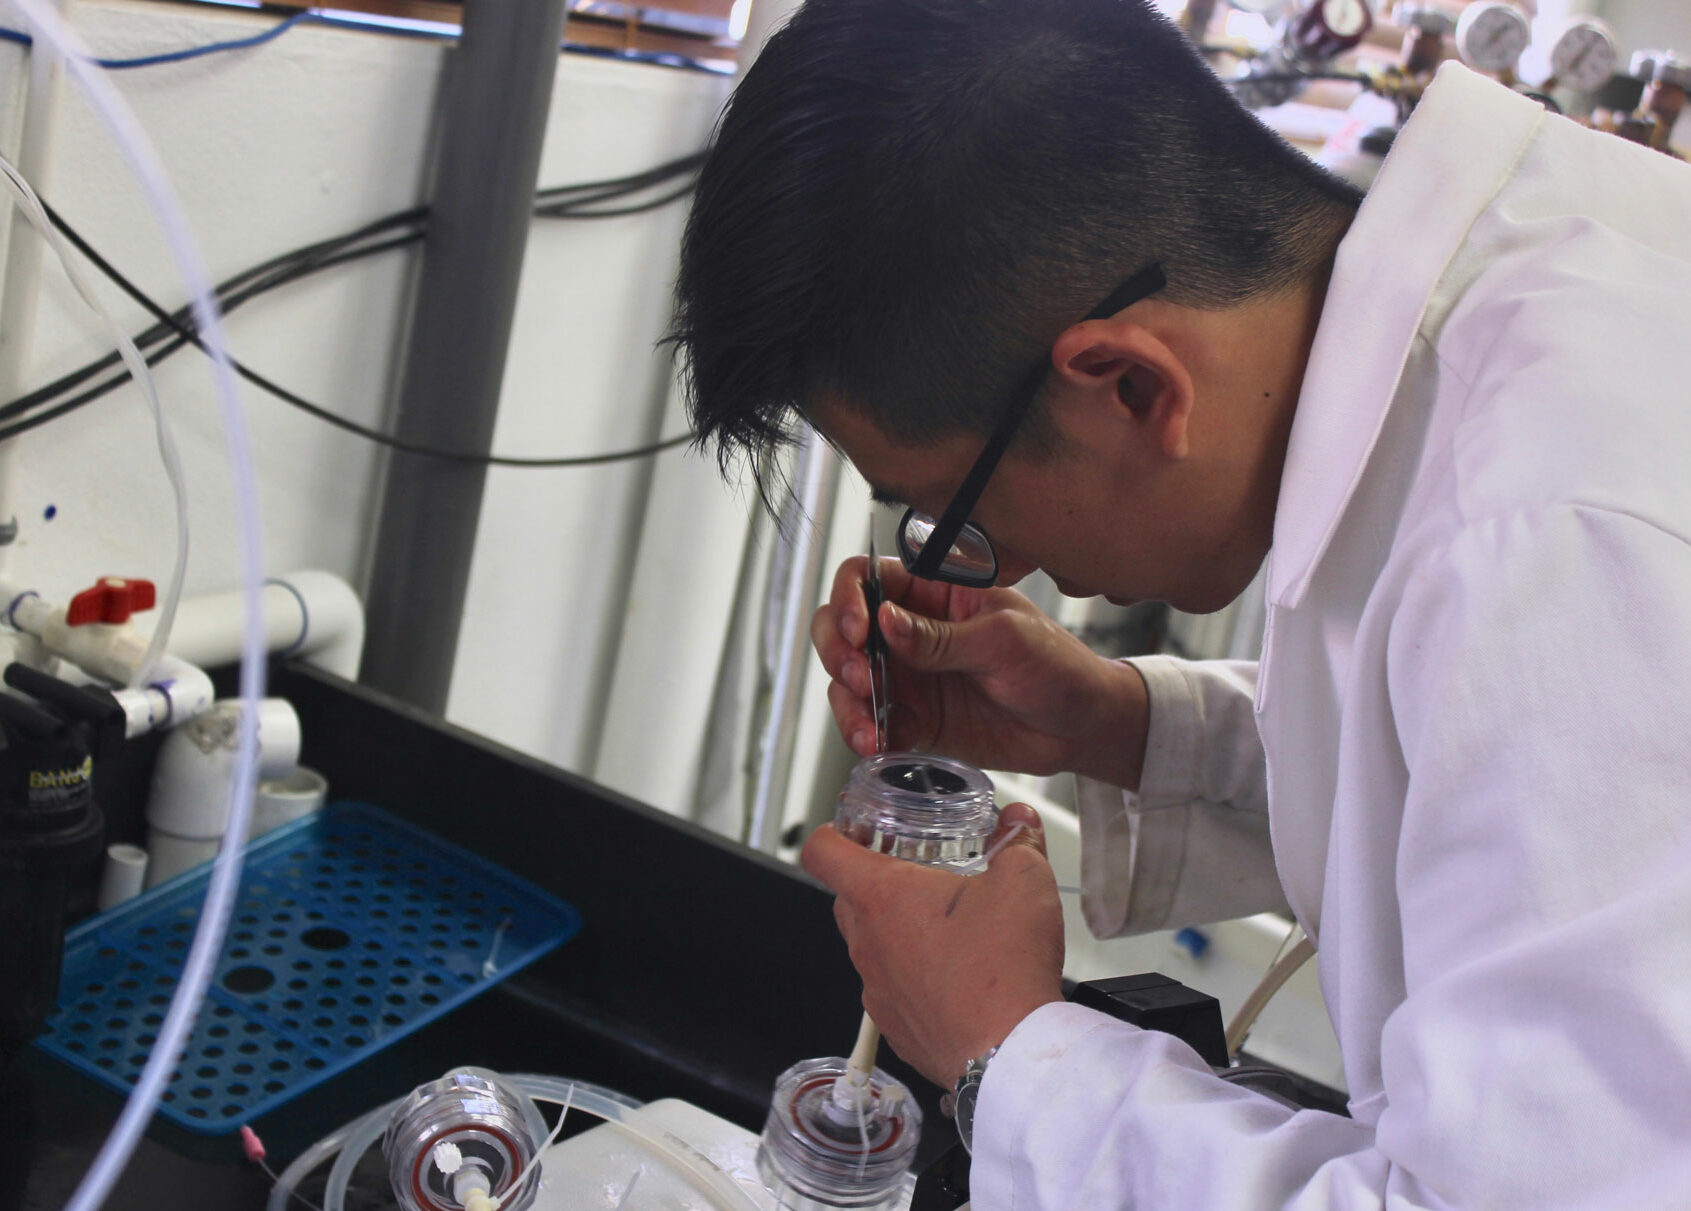 A student in a white coat works conducts an experiment in the lab